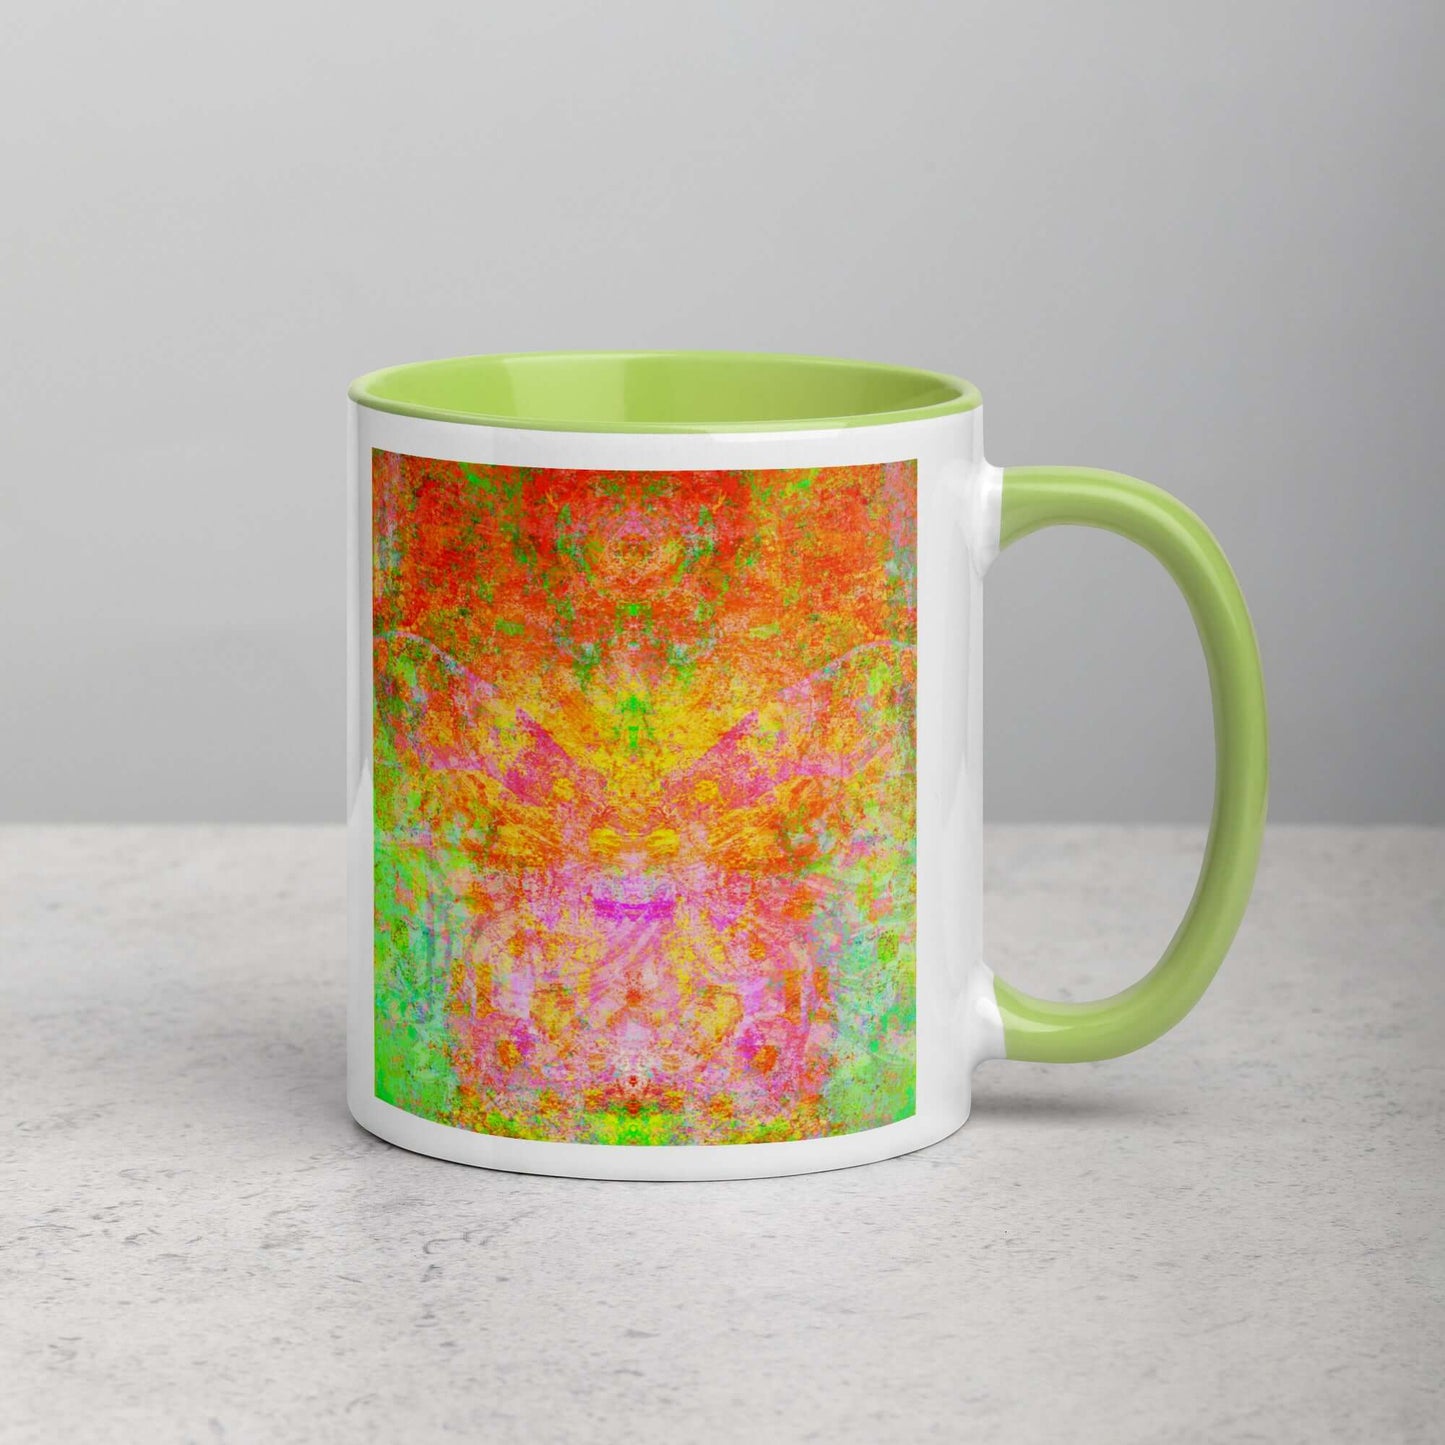 Green and Orange Butterfly Shaped “Firefly” Abstract Art Mug with Lime Green Color Inside Right Handed Front View